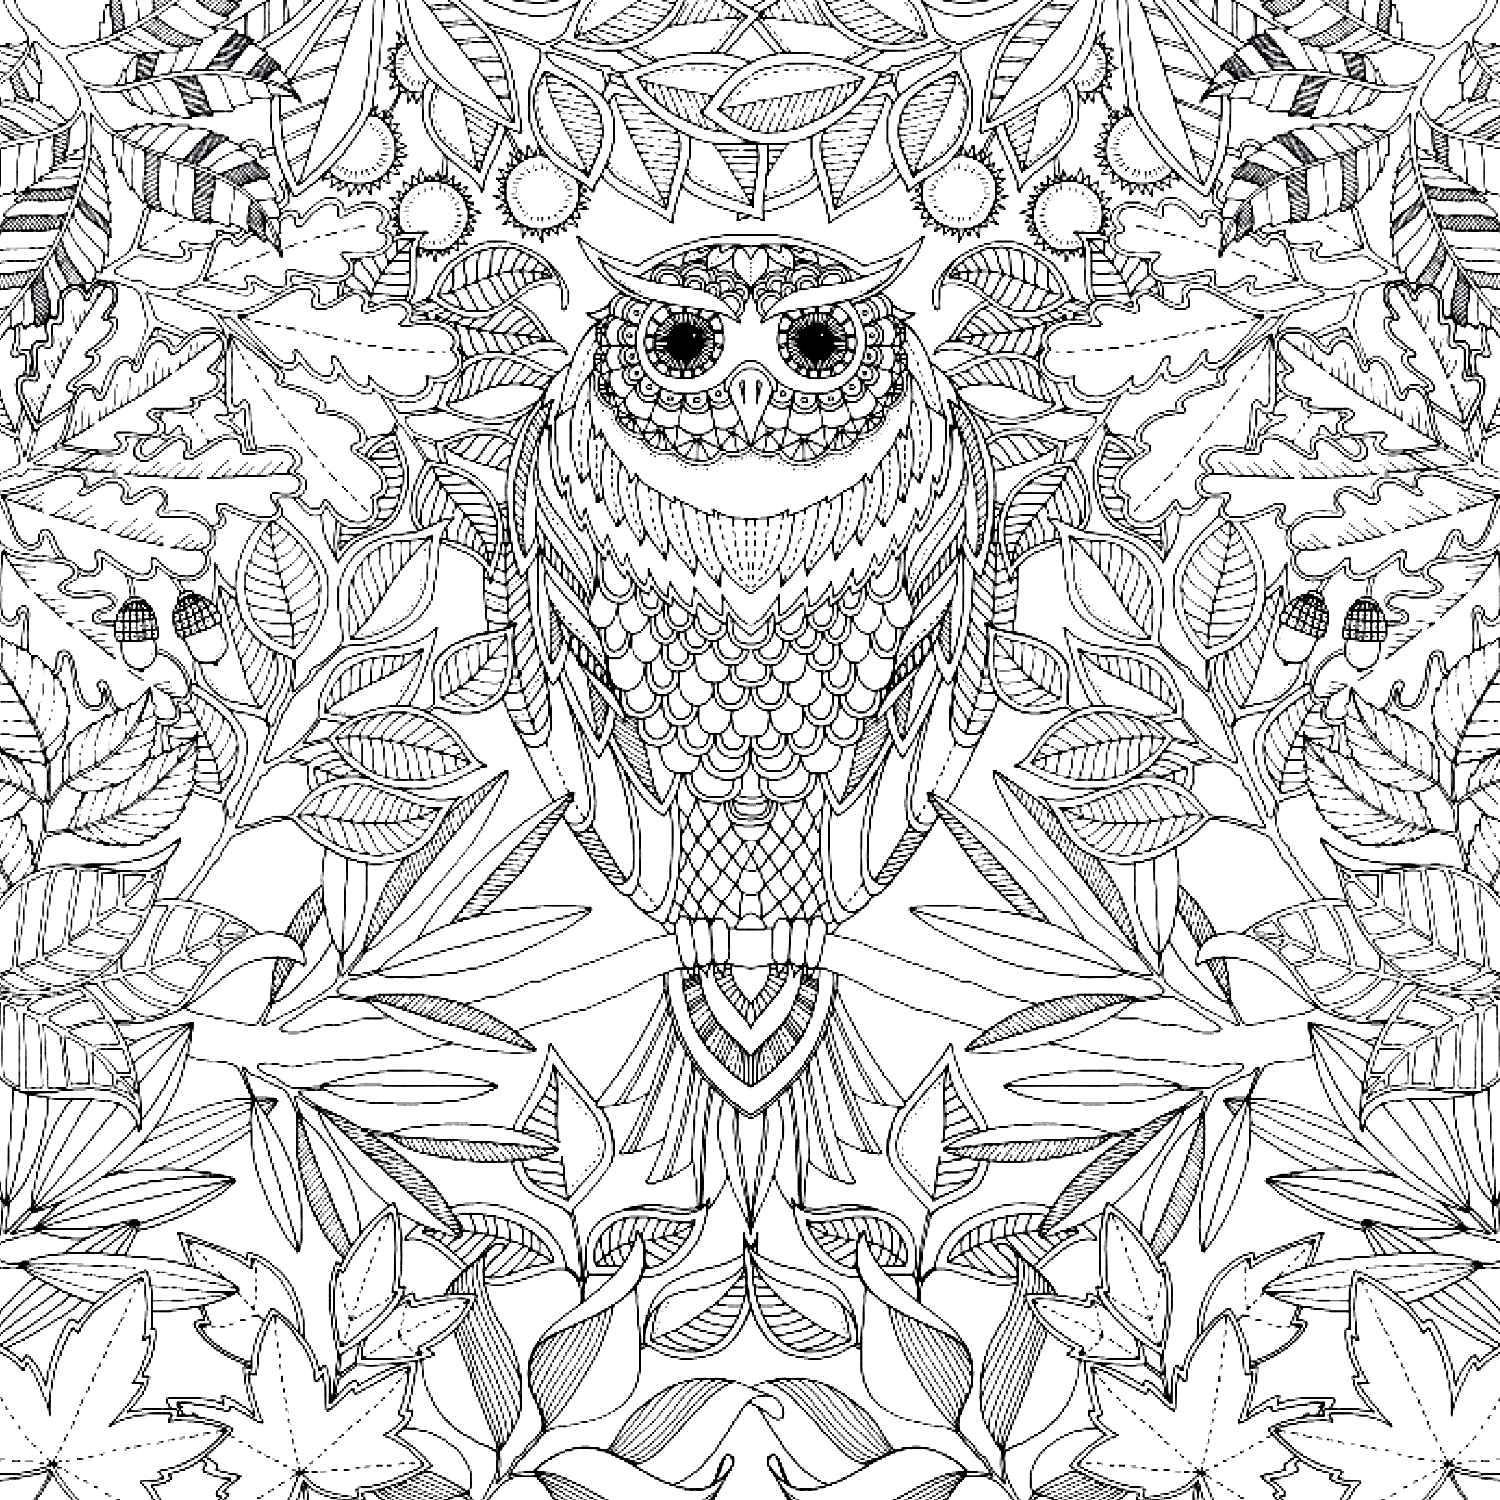 Free Adult coloring page to print and color